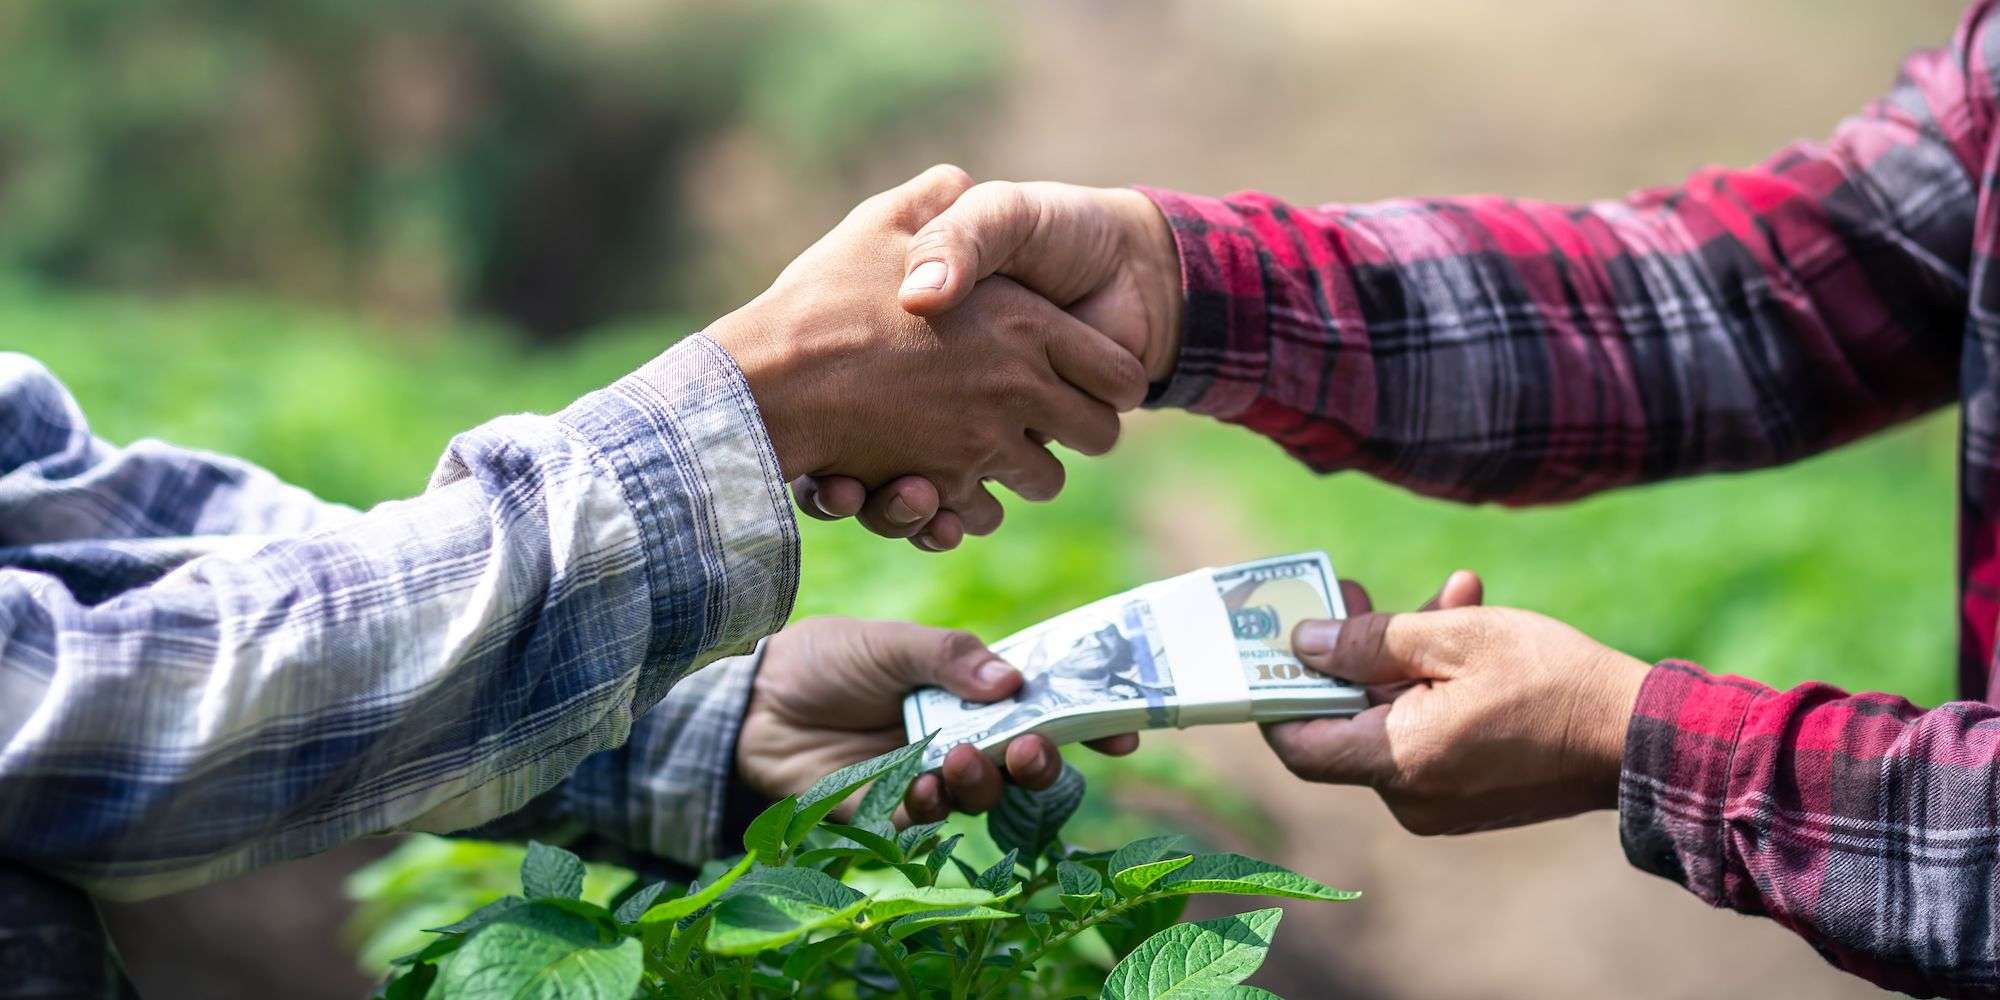 A consumer shaking hands with a farmer over a crow of potato plants and exchanging money